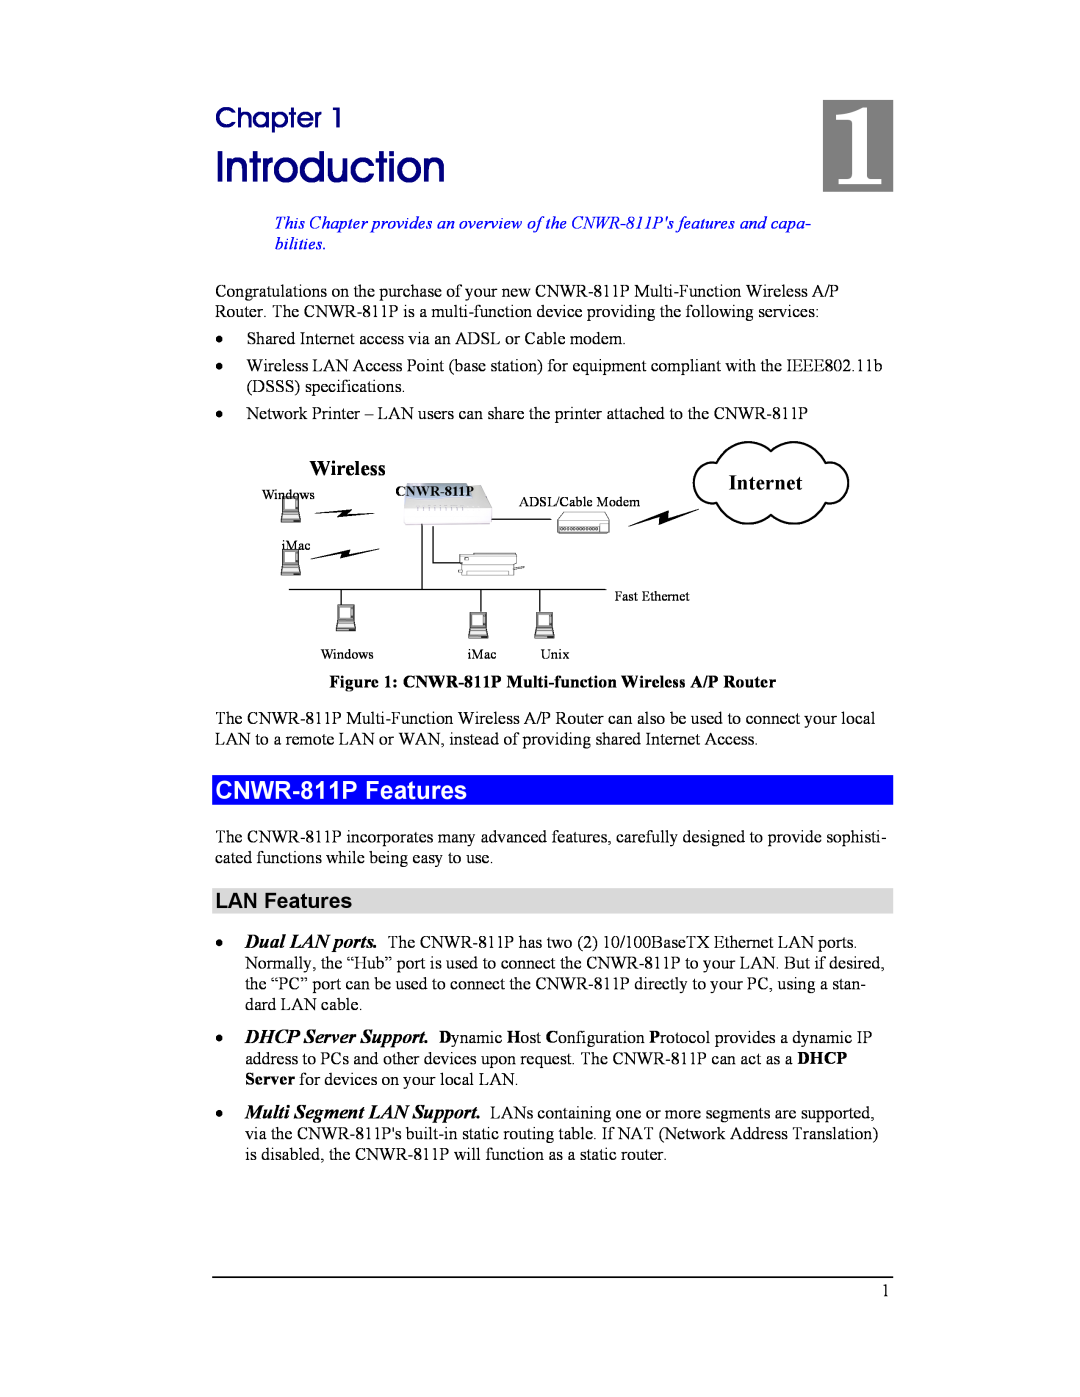 CNET manual Introduction, Chapter, CNWR-811P Features, LAN Features, Wireless, Internet 